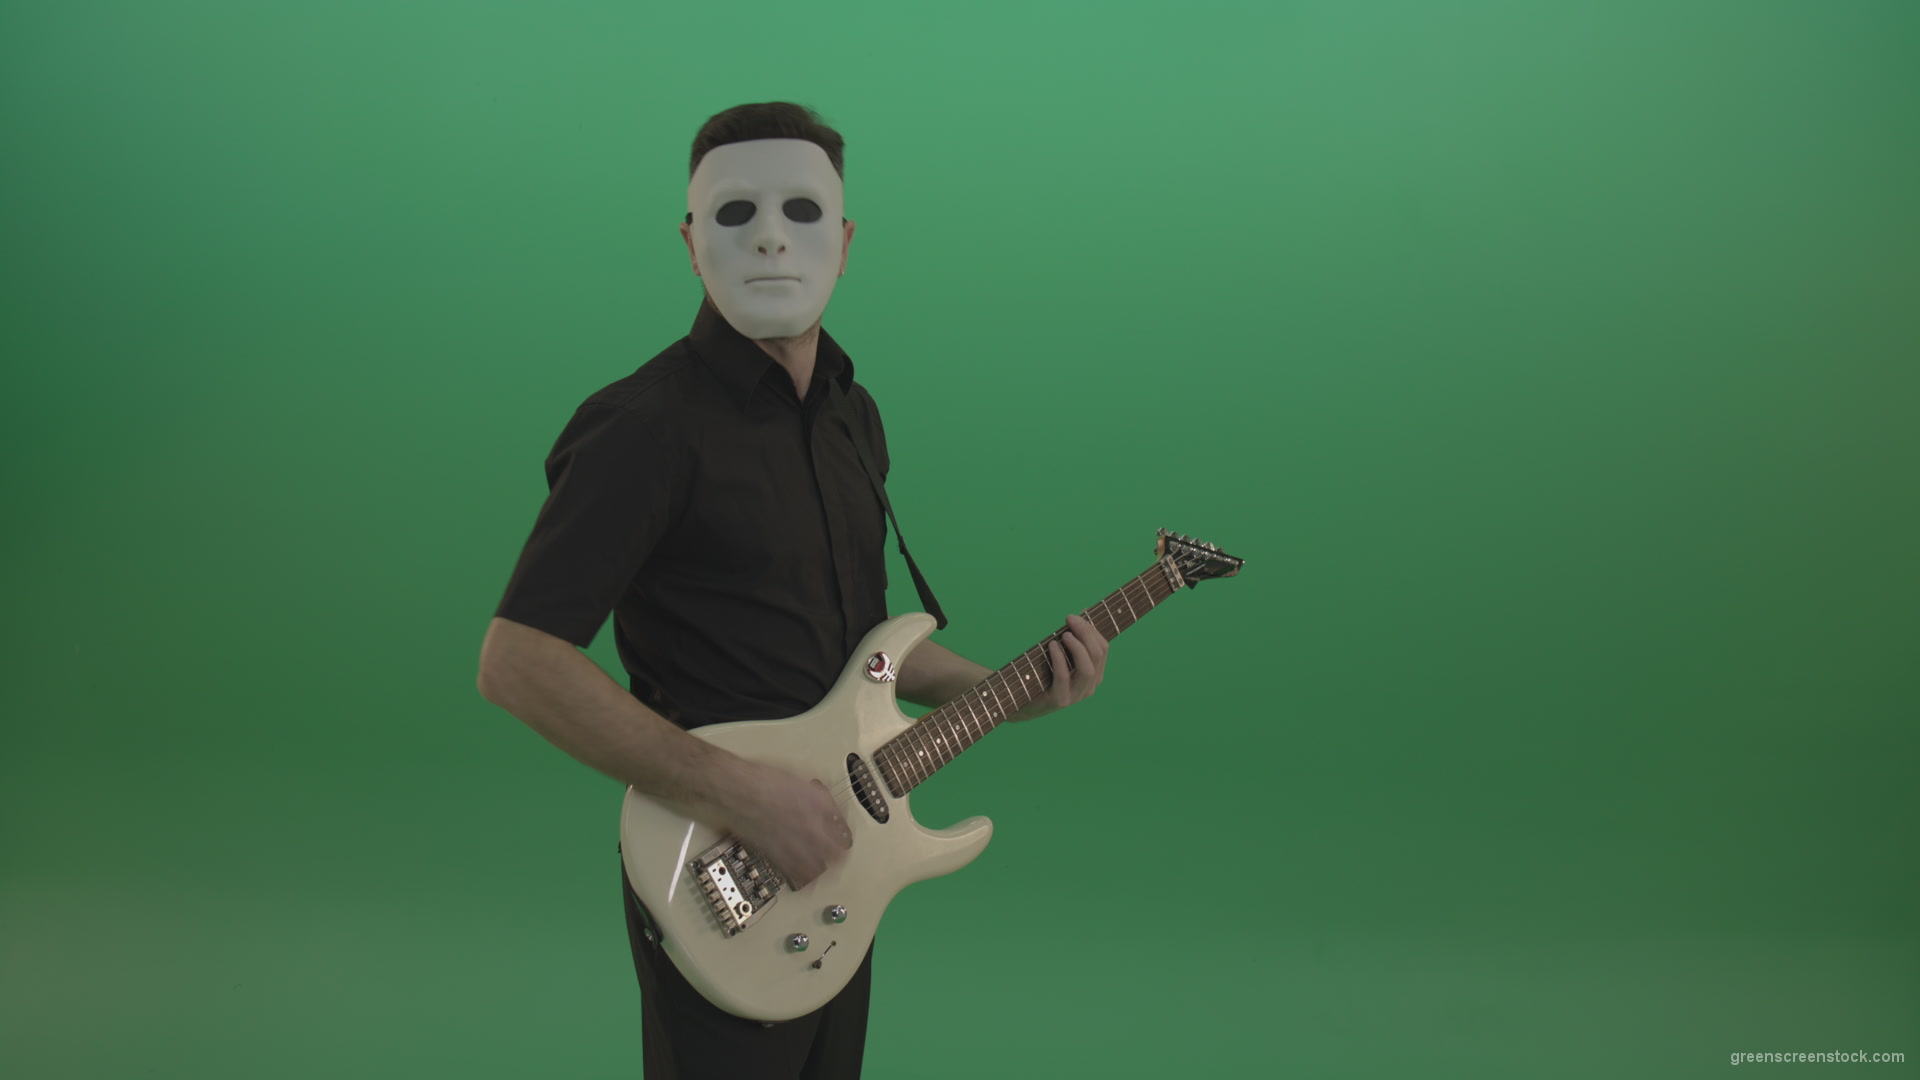 Rock-man-in-white-mask-and-black-wear-playing-guitar-isolated-on-green-screen-in-side-view_009 Green Screen Stock